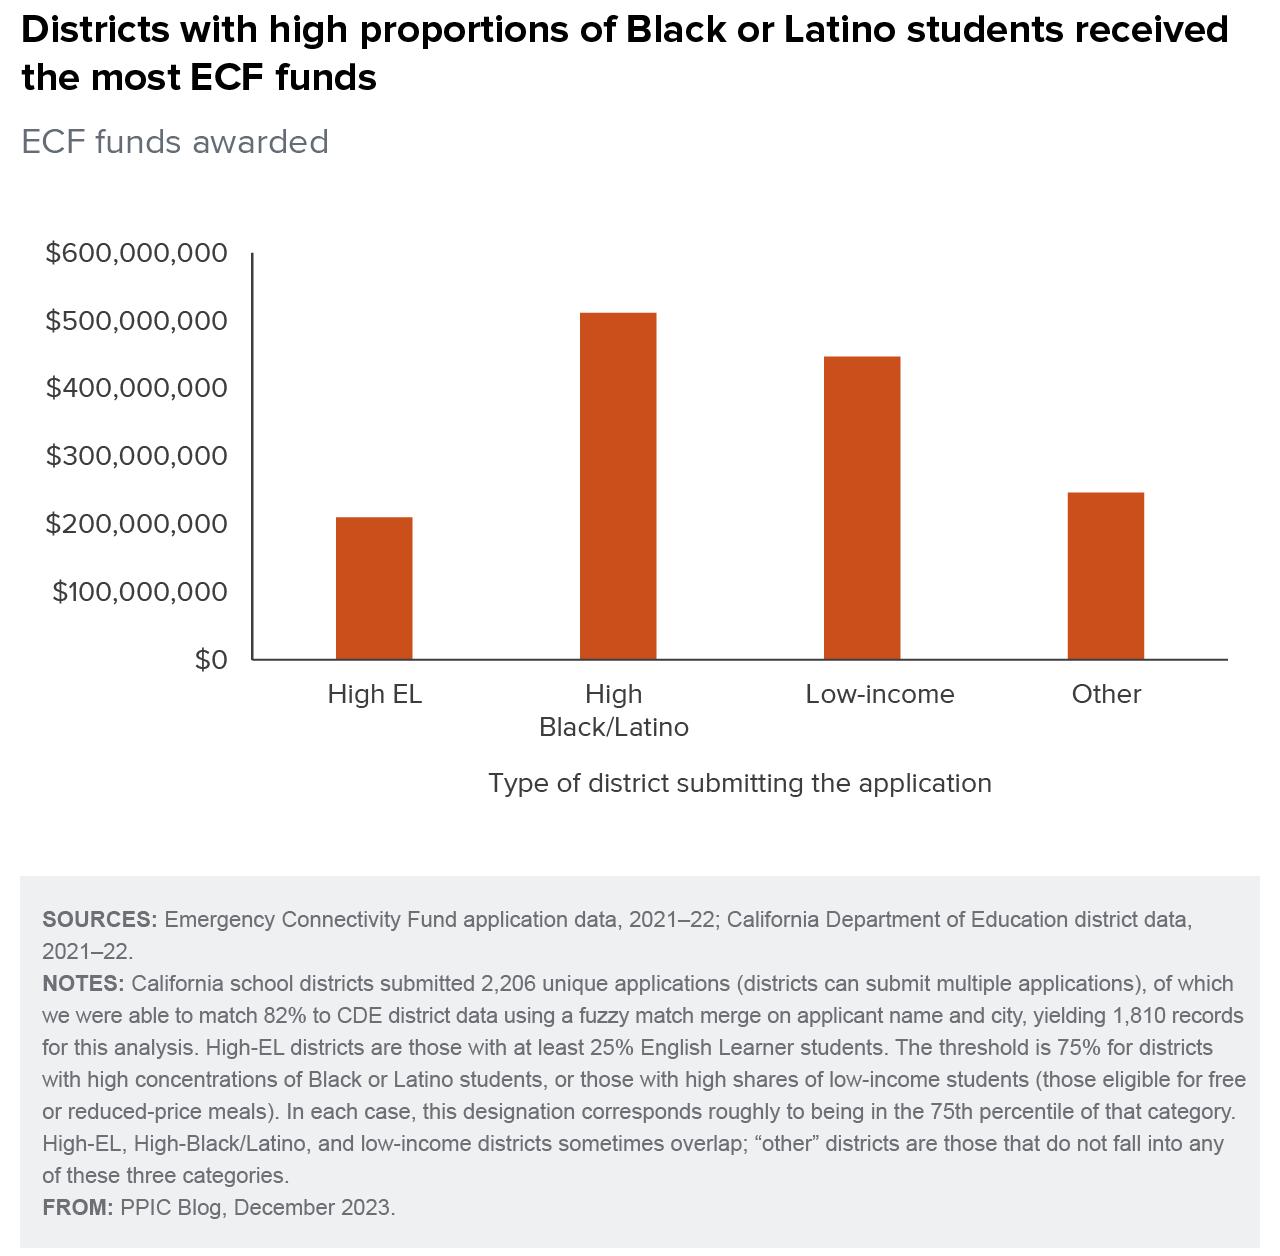 figure - Districts with high proportions of Black or Latino students received the most ECF funds